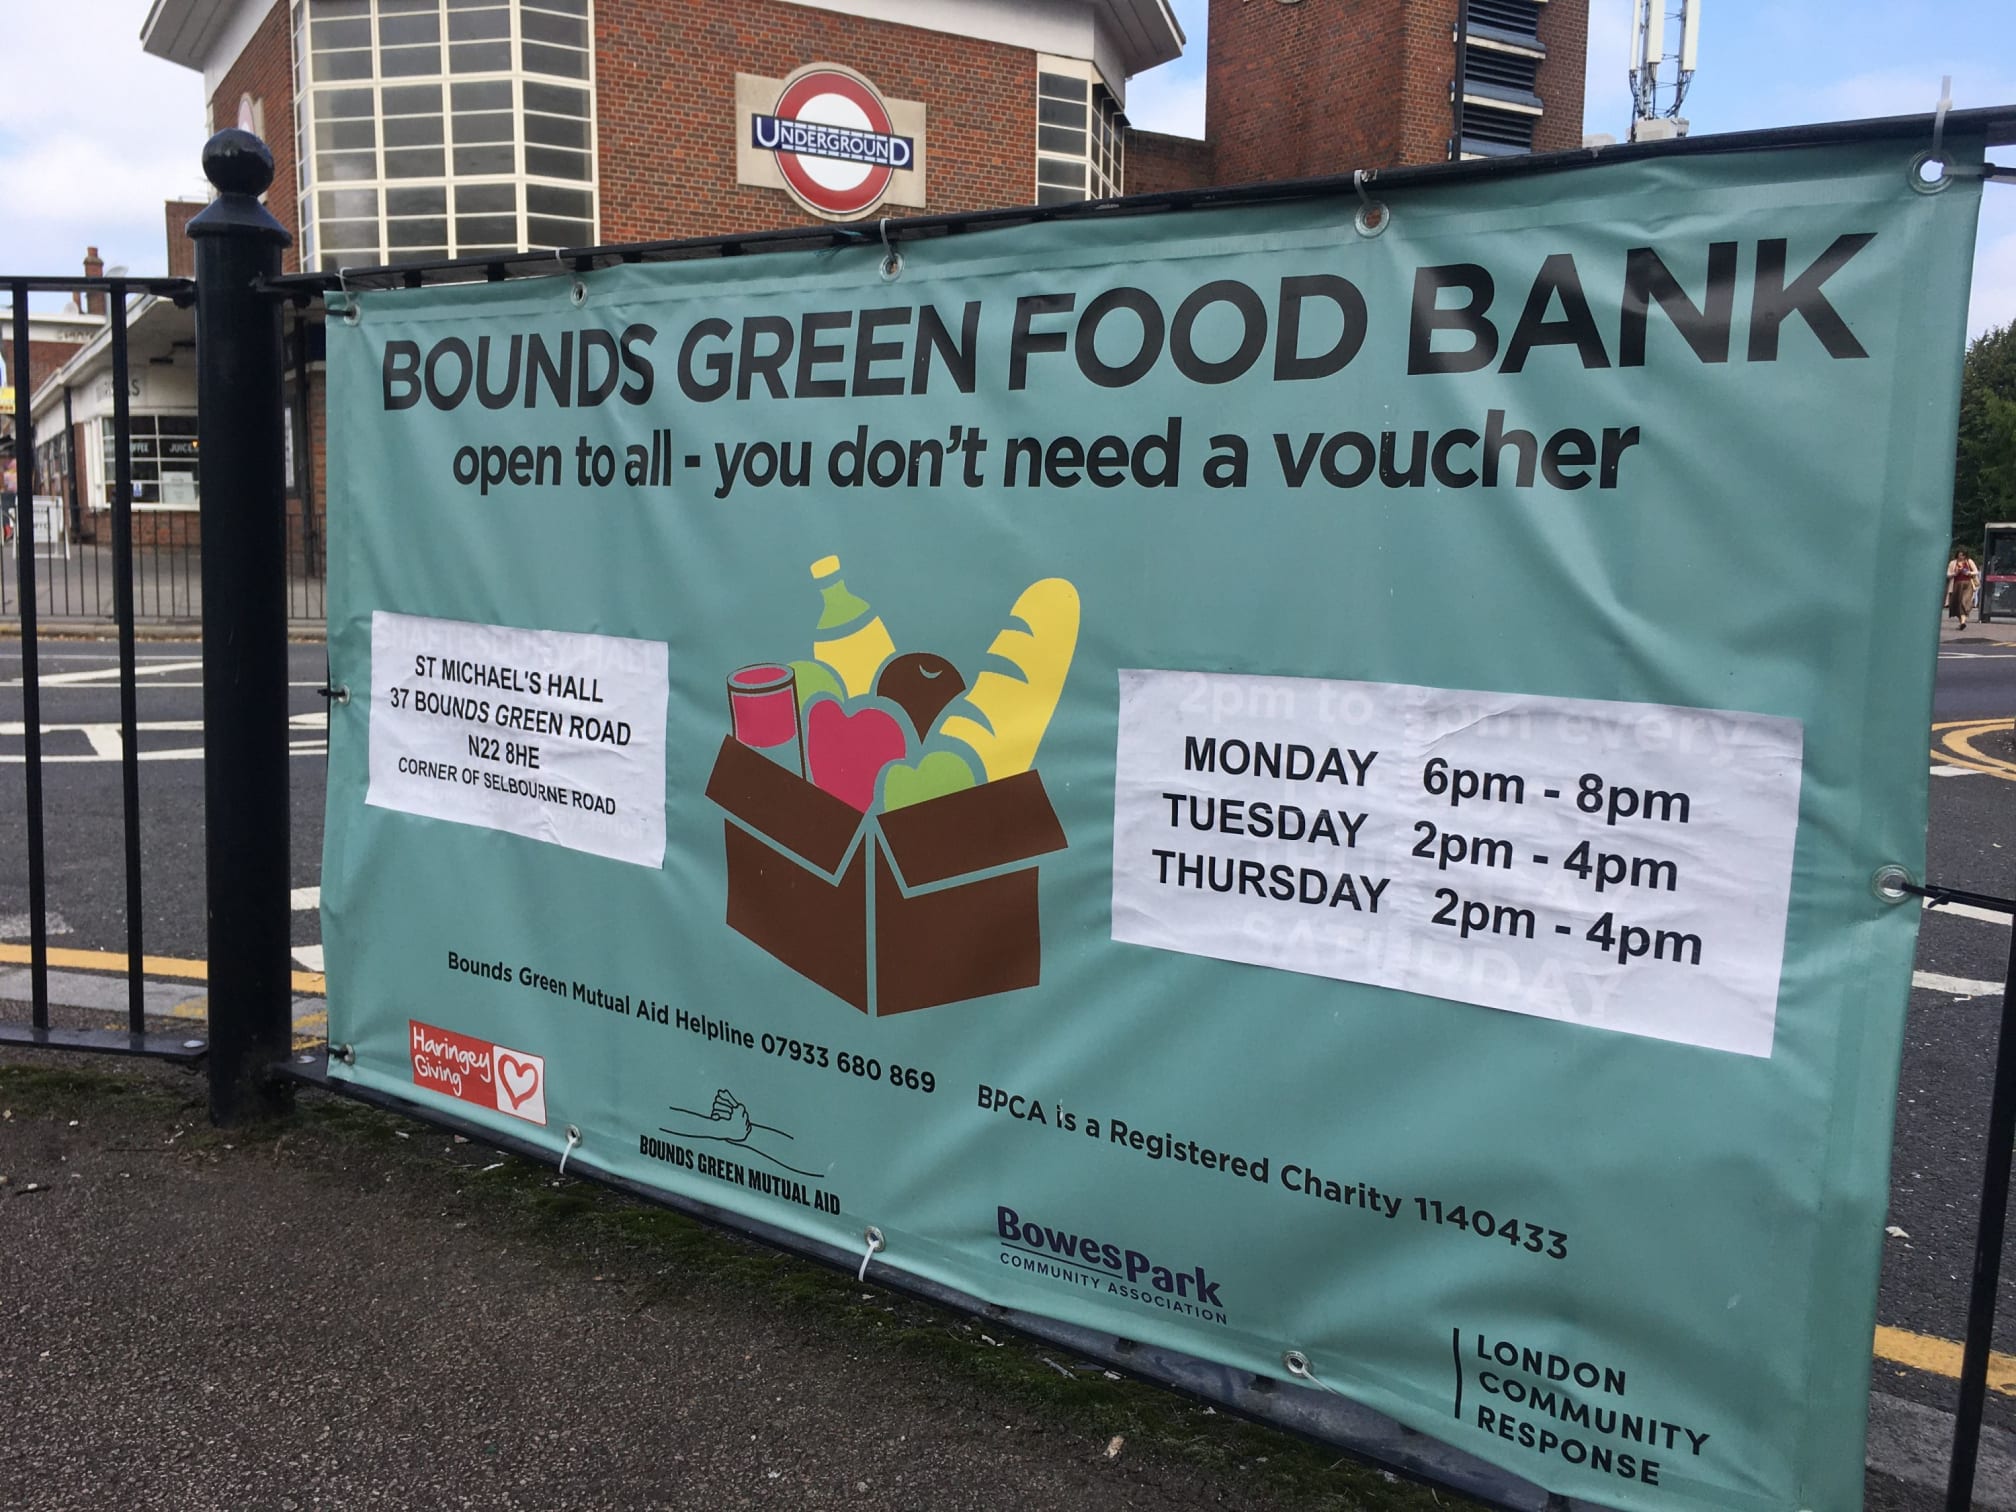 Bounds Green Food Bank banner with opening times at the entrance to the Food Bank